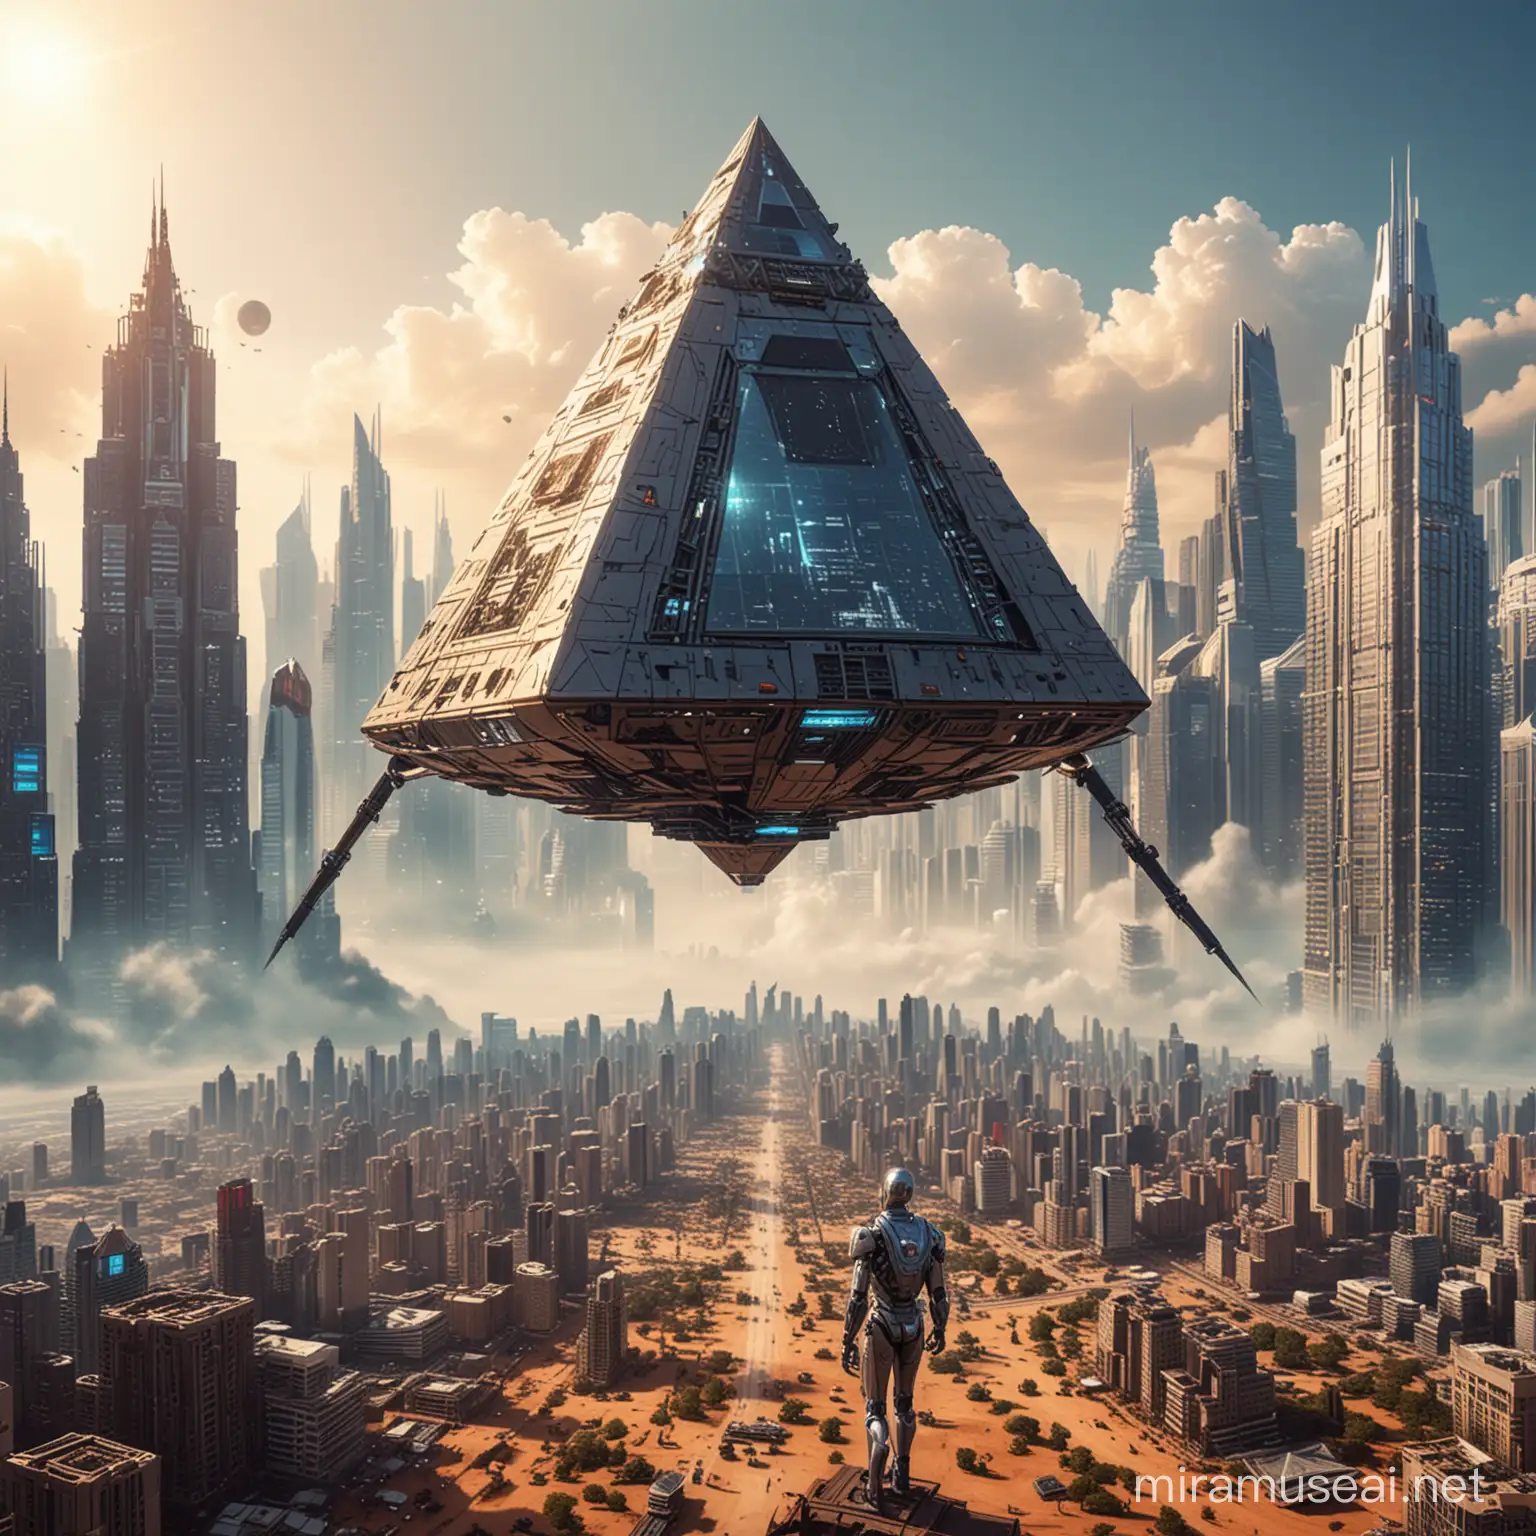 A close-up of a triangular pyramid, humanoid robots, super-advanced machines, a planet close to the sky, many skyscrapers.